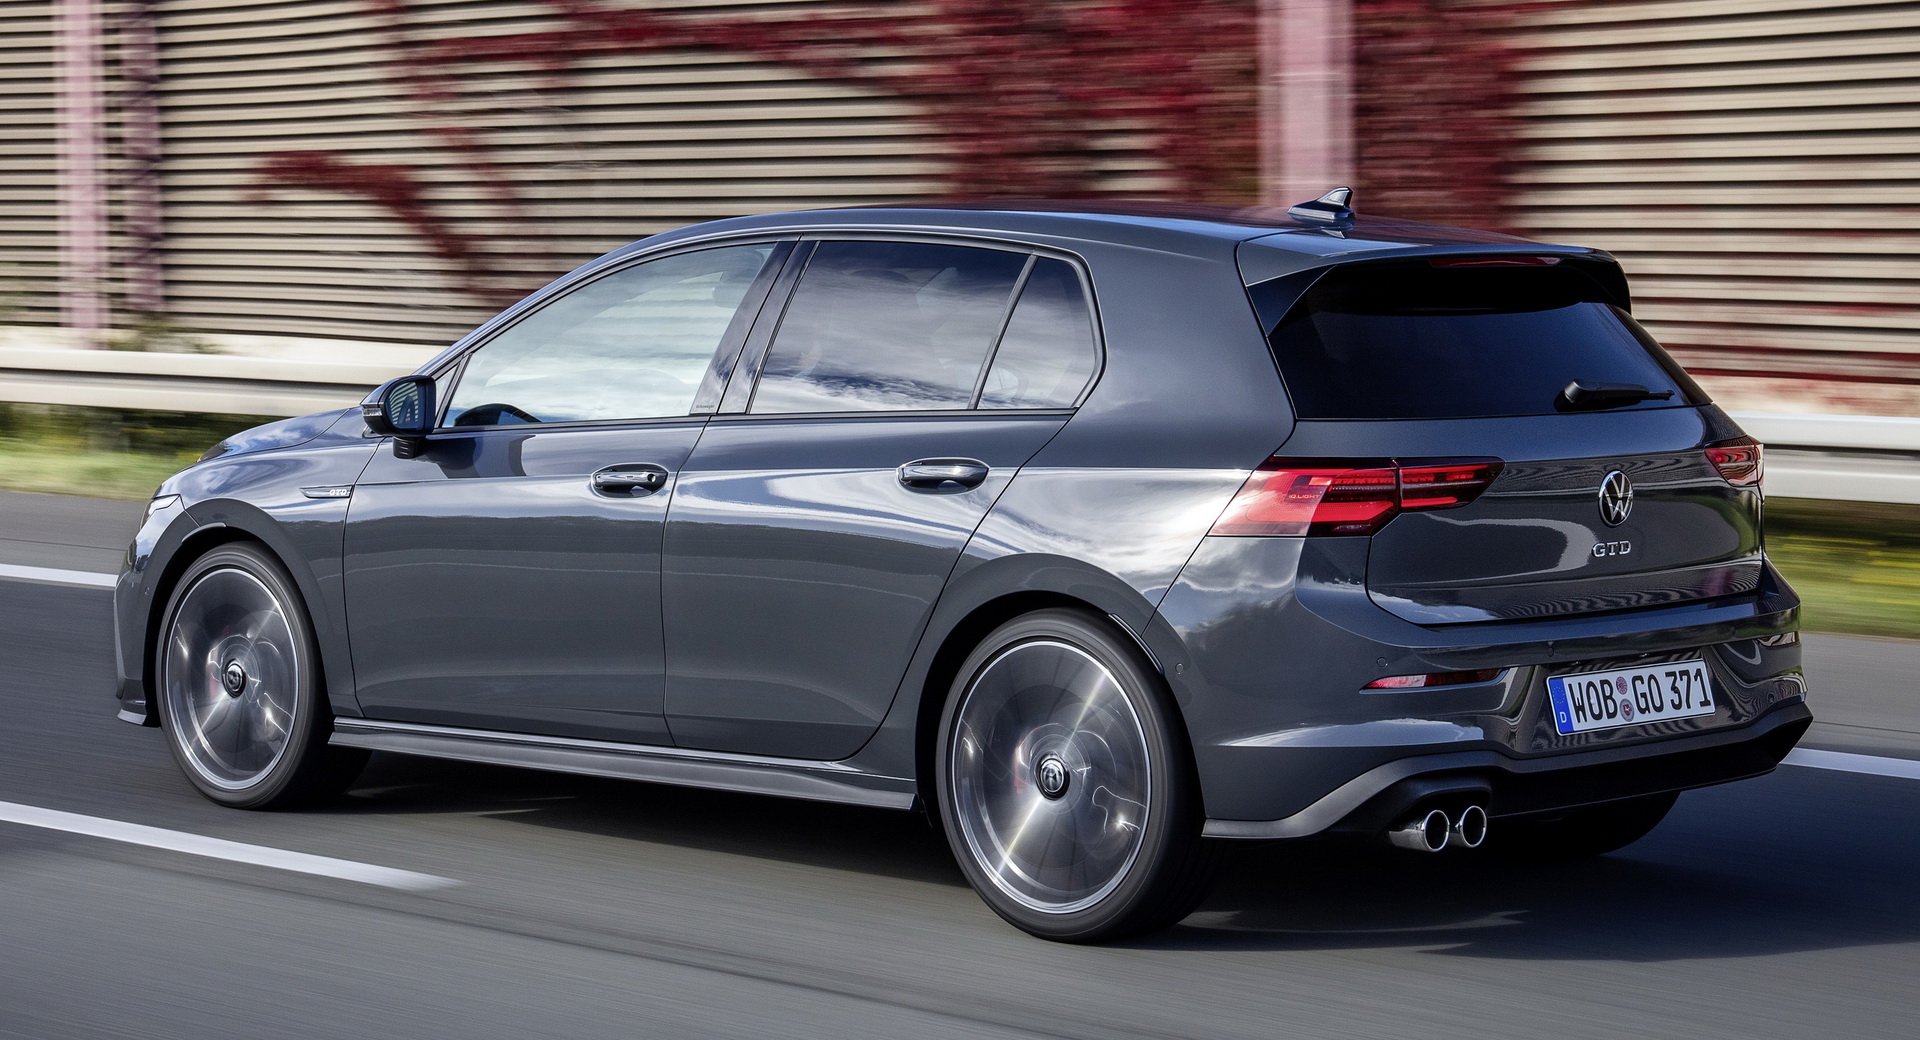 Onbeleefd Hassy Pa 2021 VW Golf GTD Brings 197 HP Diesel To The UK From £32,790 | Carscoops